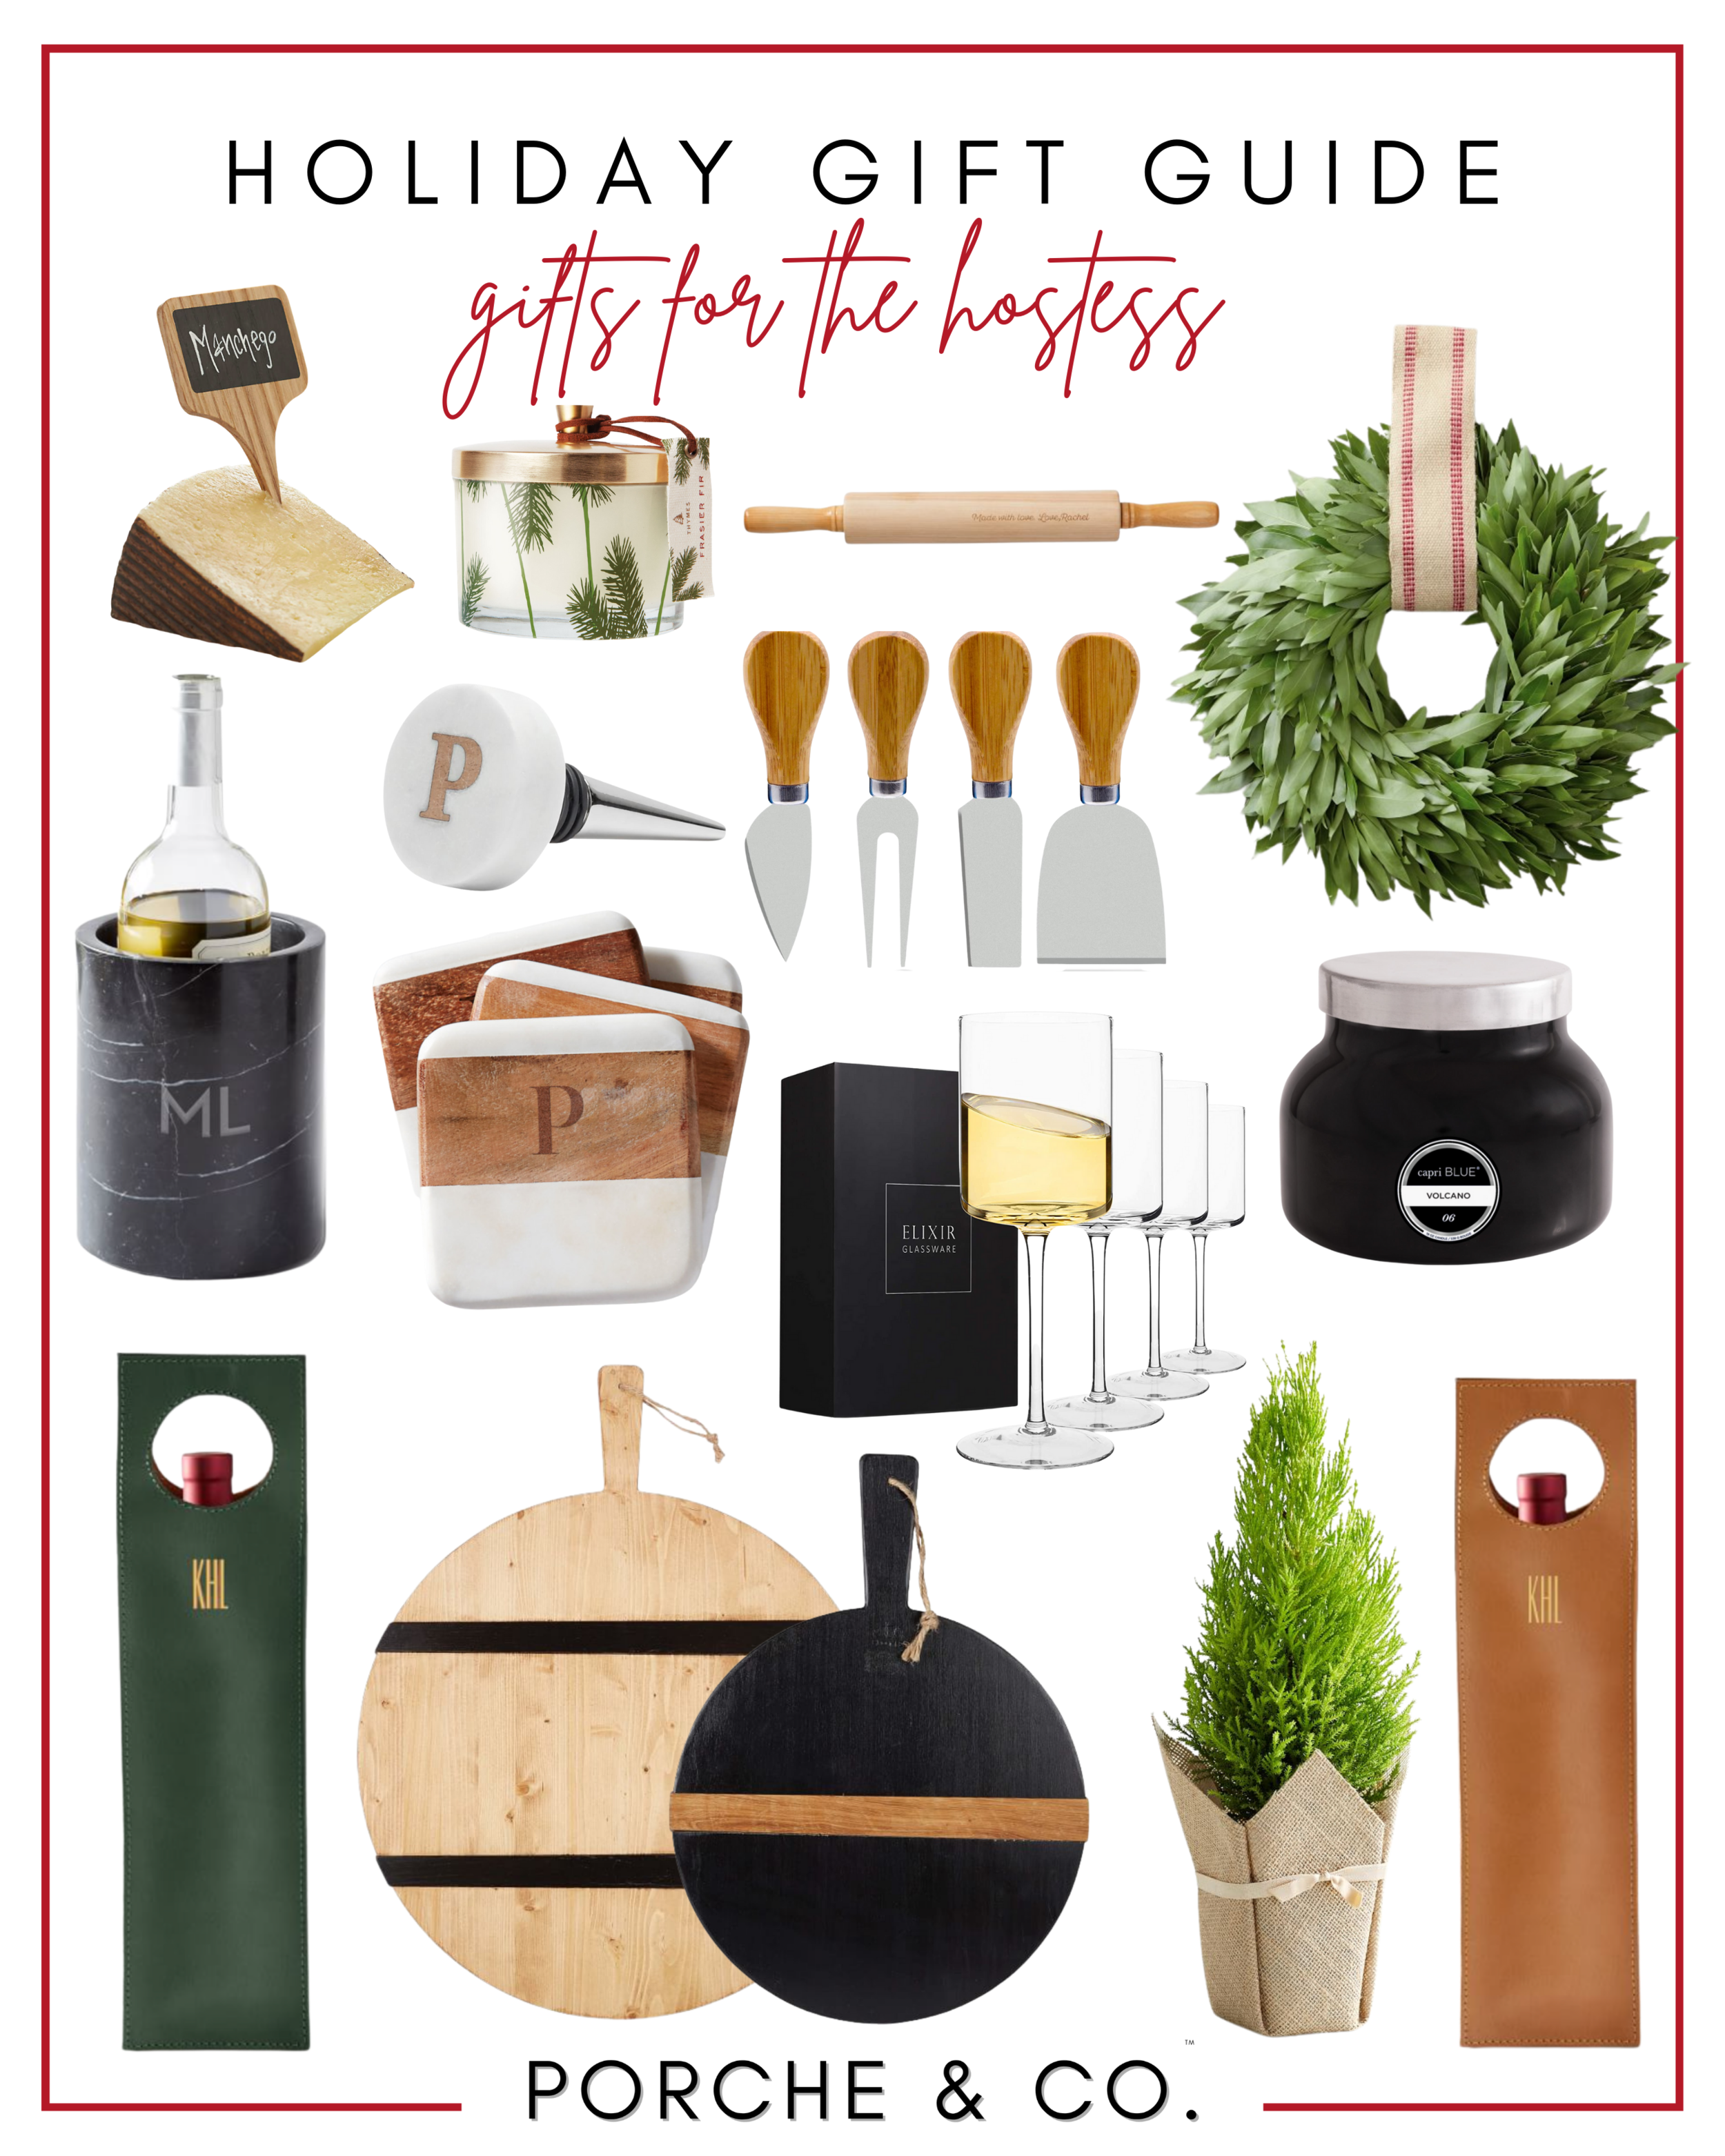 gifts for the hostess (Copy)